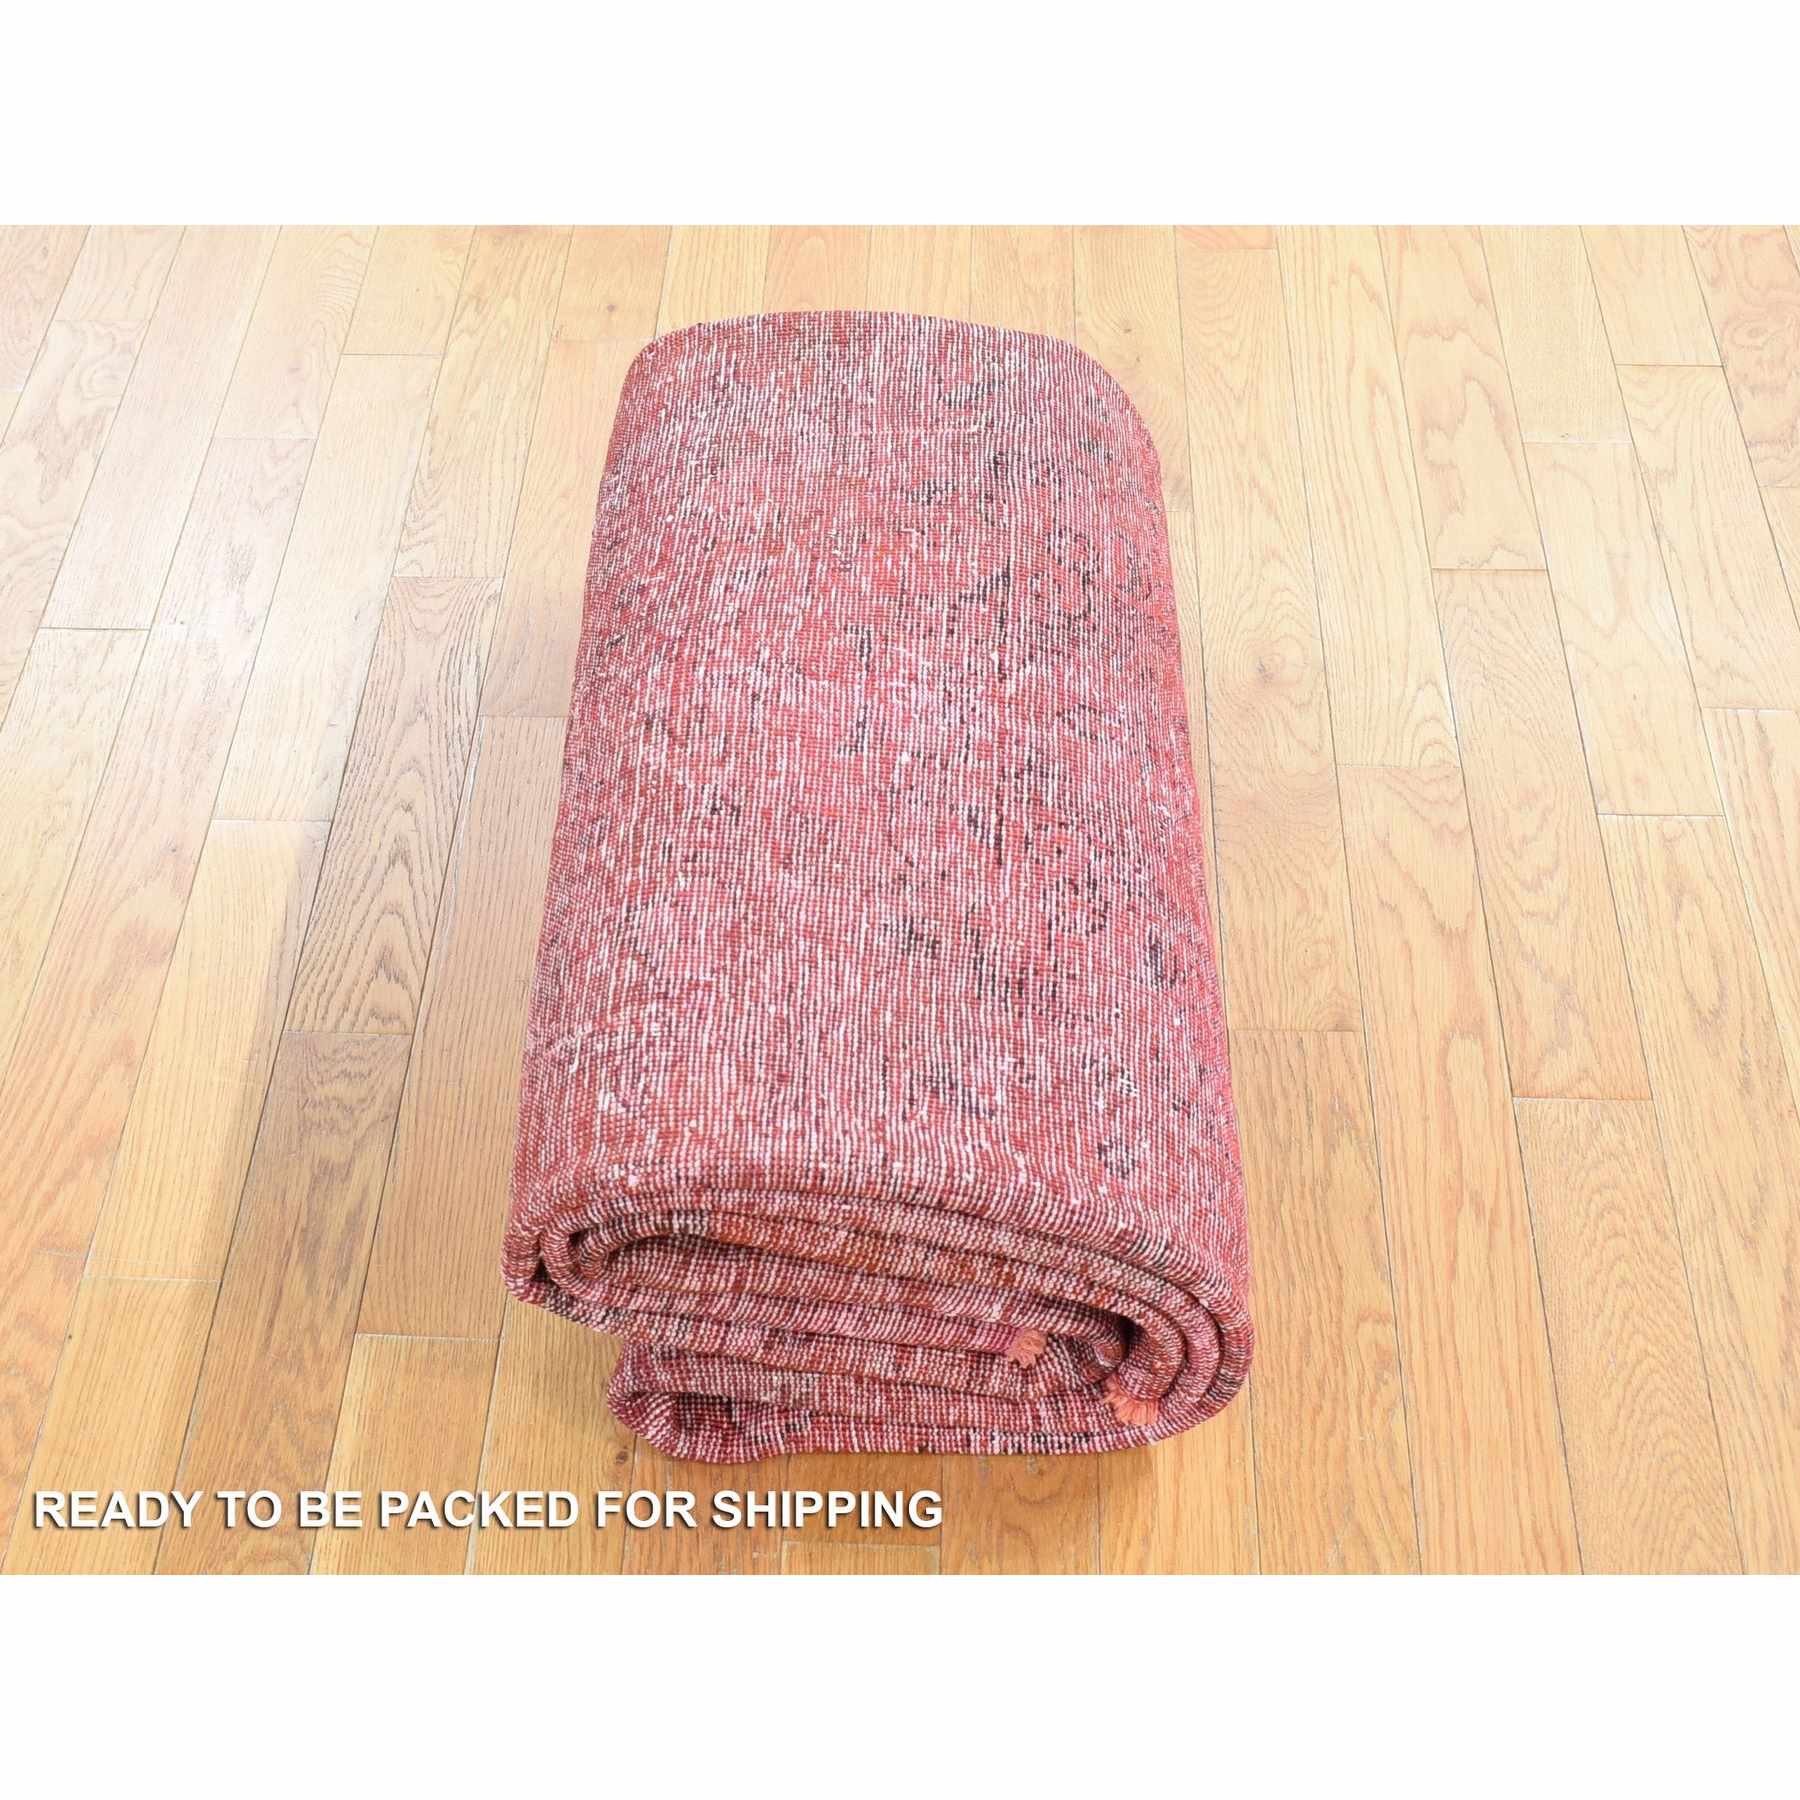 Overdyed-Vintage-Hand-Knotted-Rug-403470